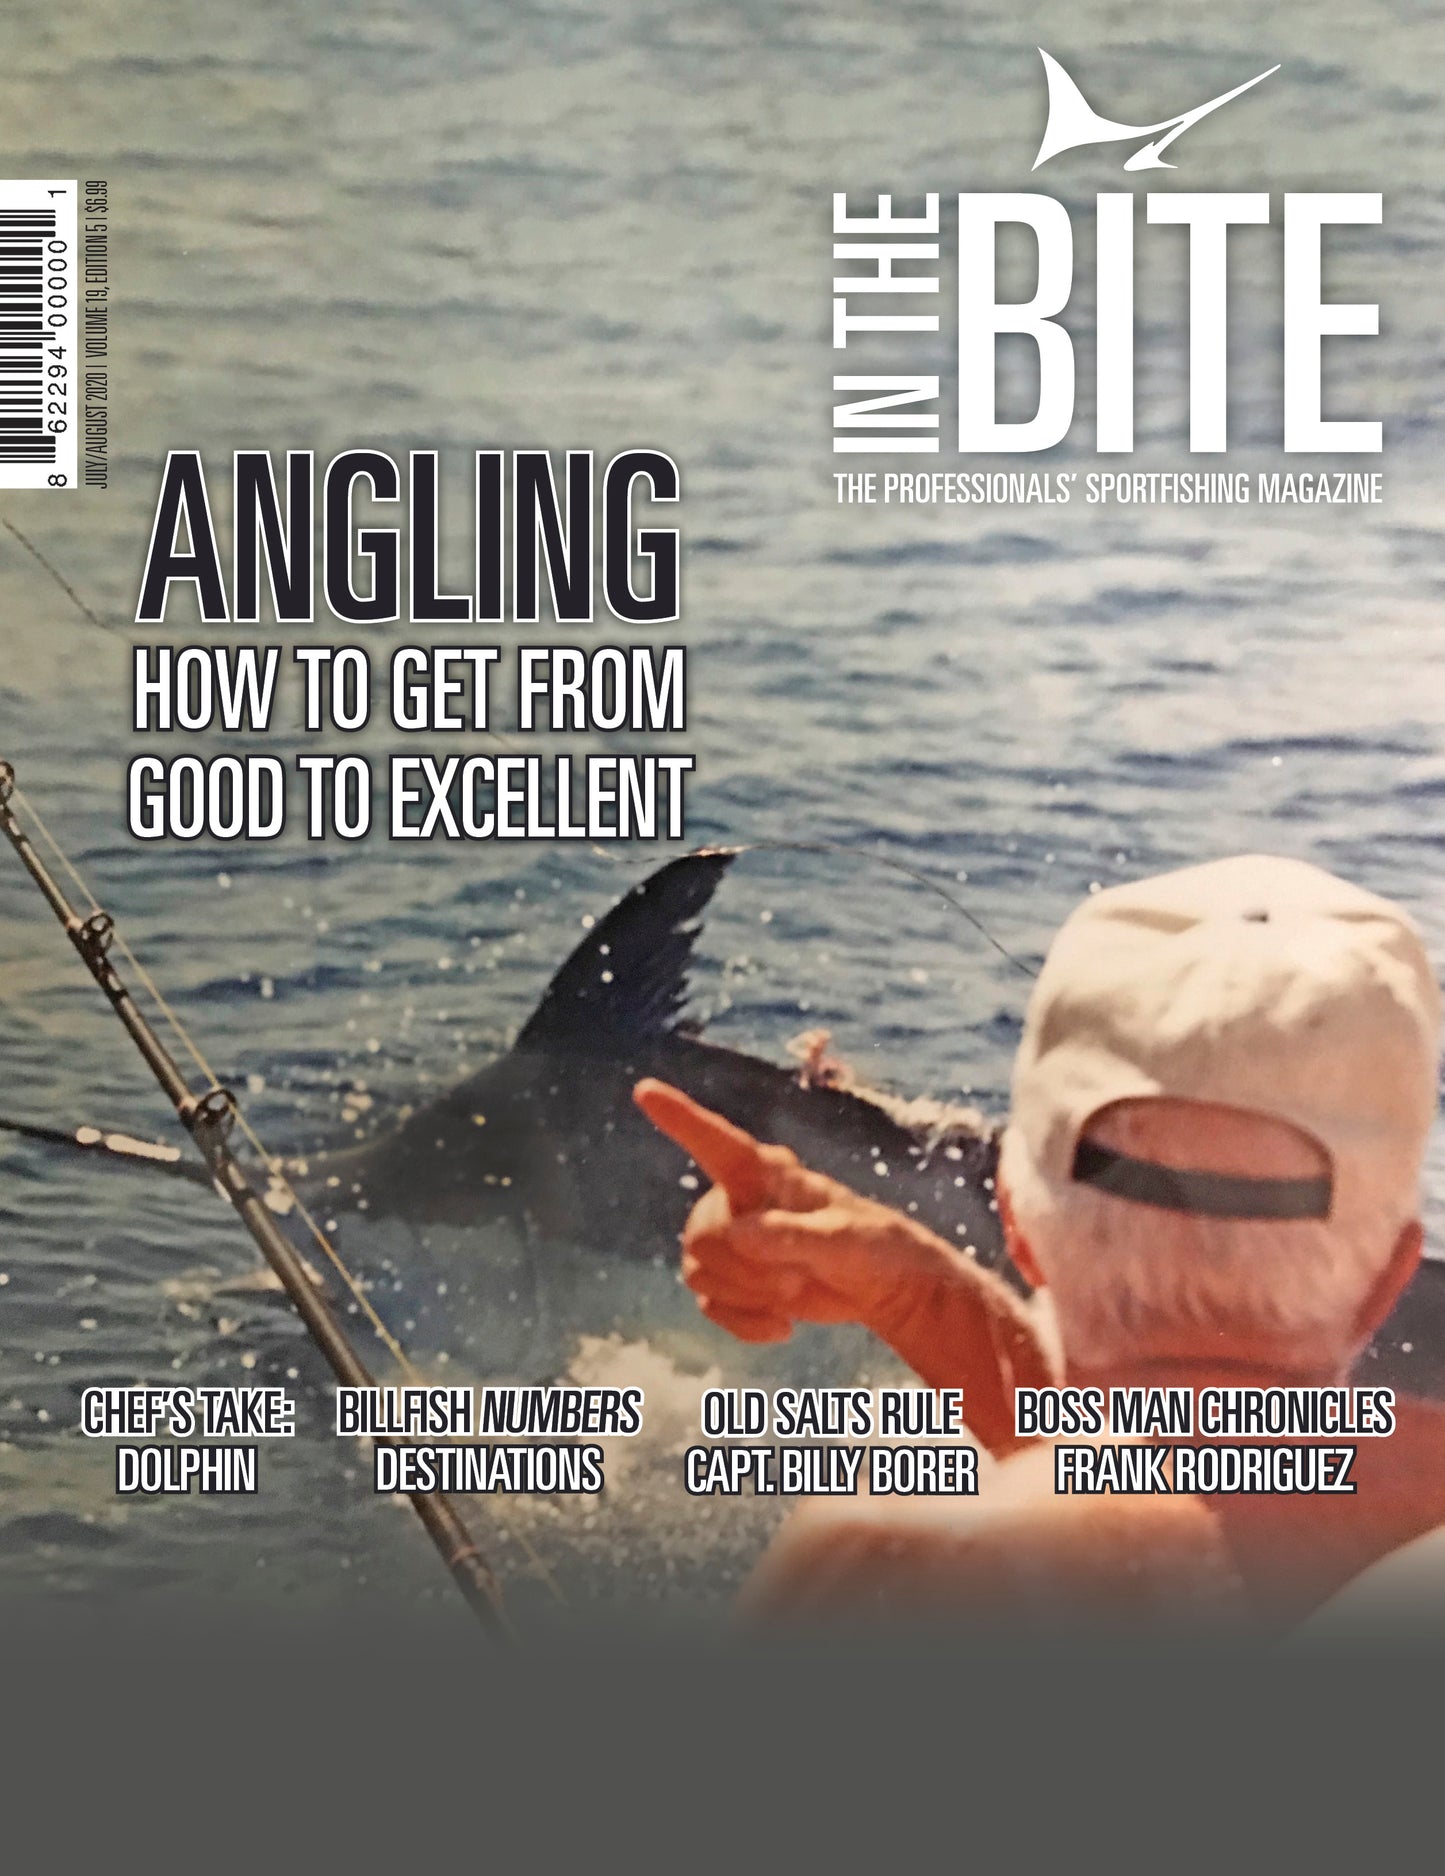 InTheBite Volume 19 Edition 05 July/August 2020